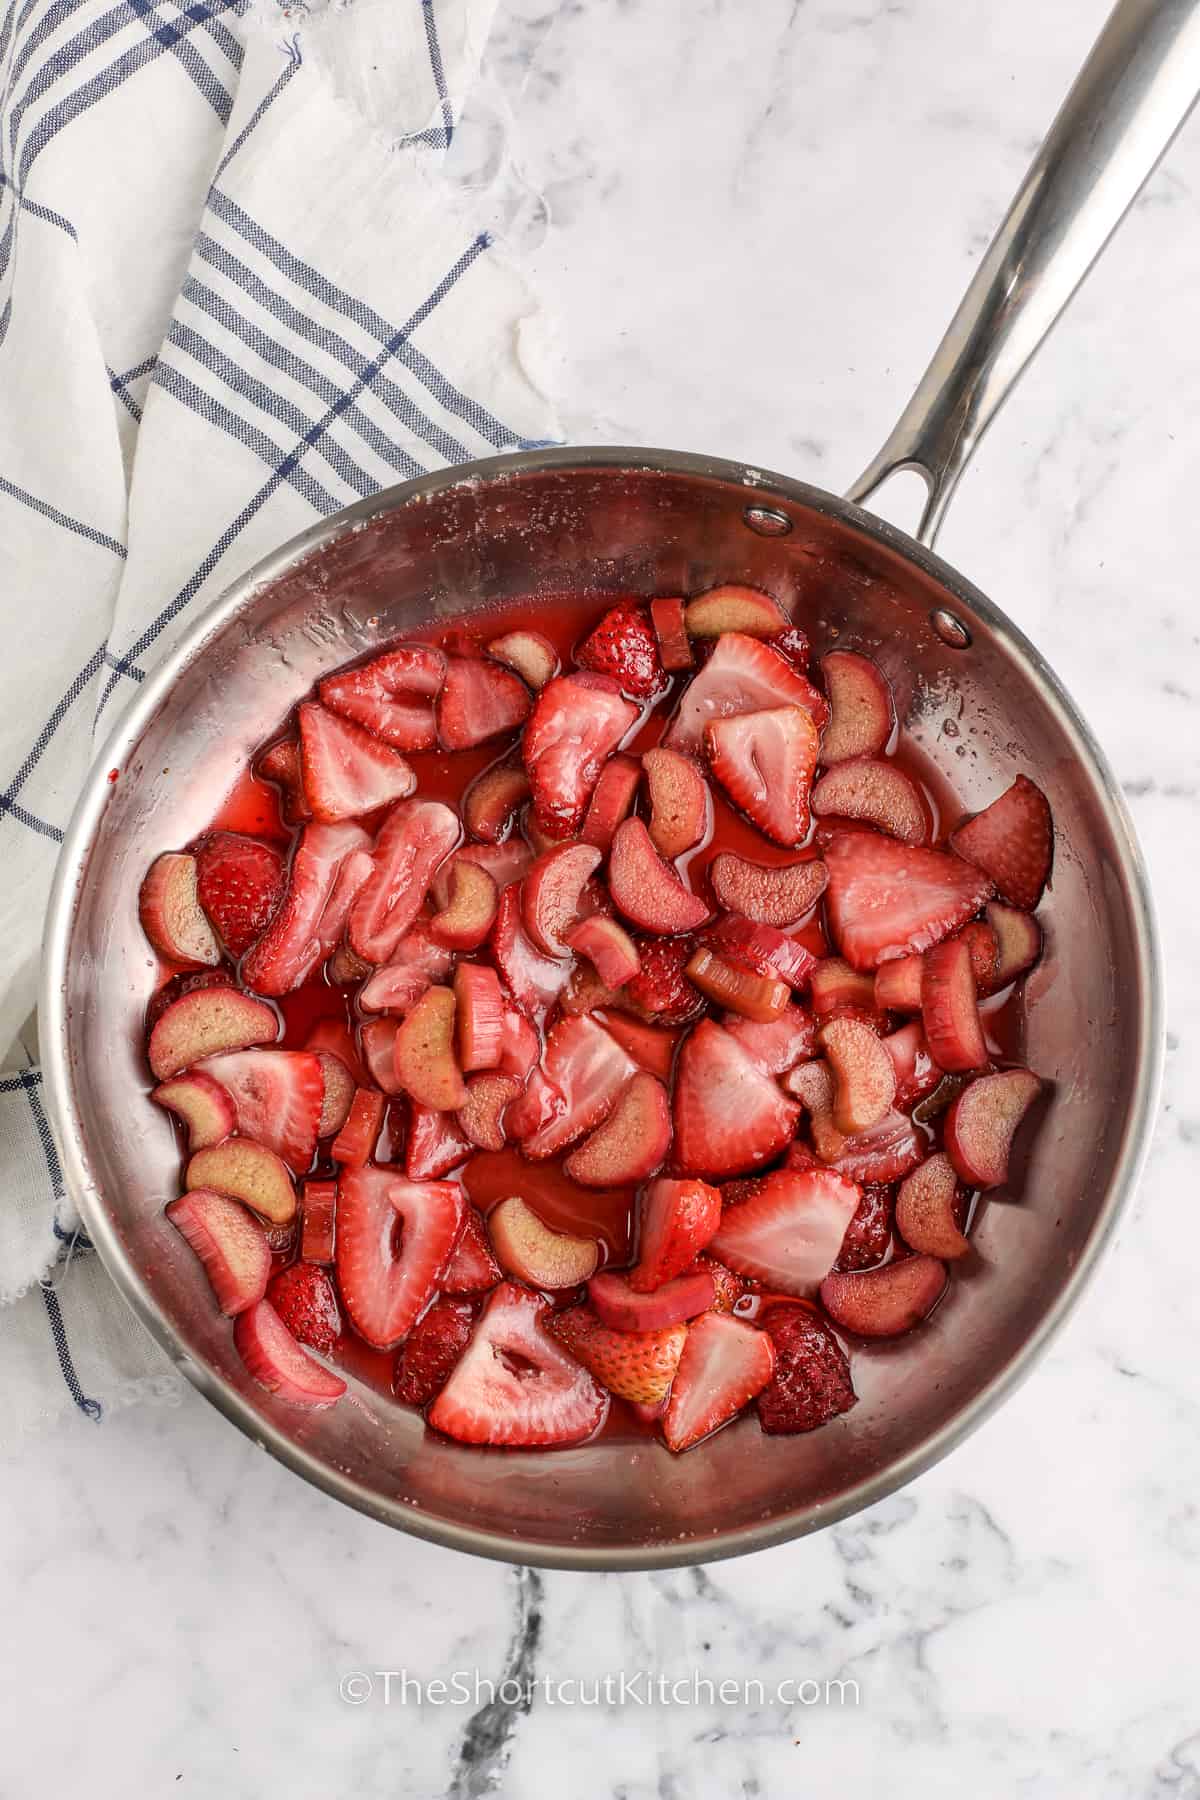 strawberries and rhubarb cooking in the pan to make Strawberry Rhubarb Cobbler